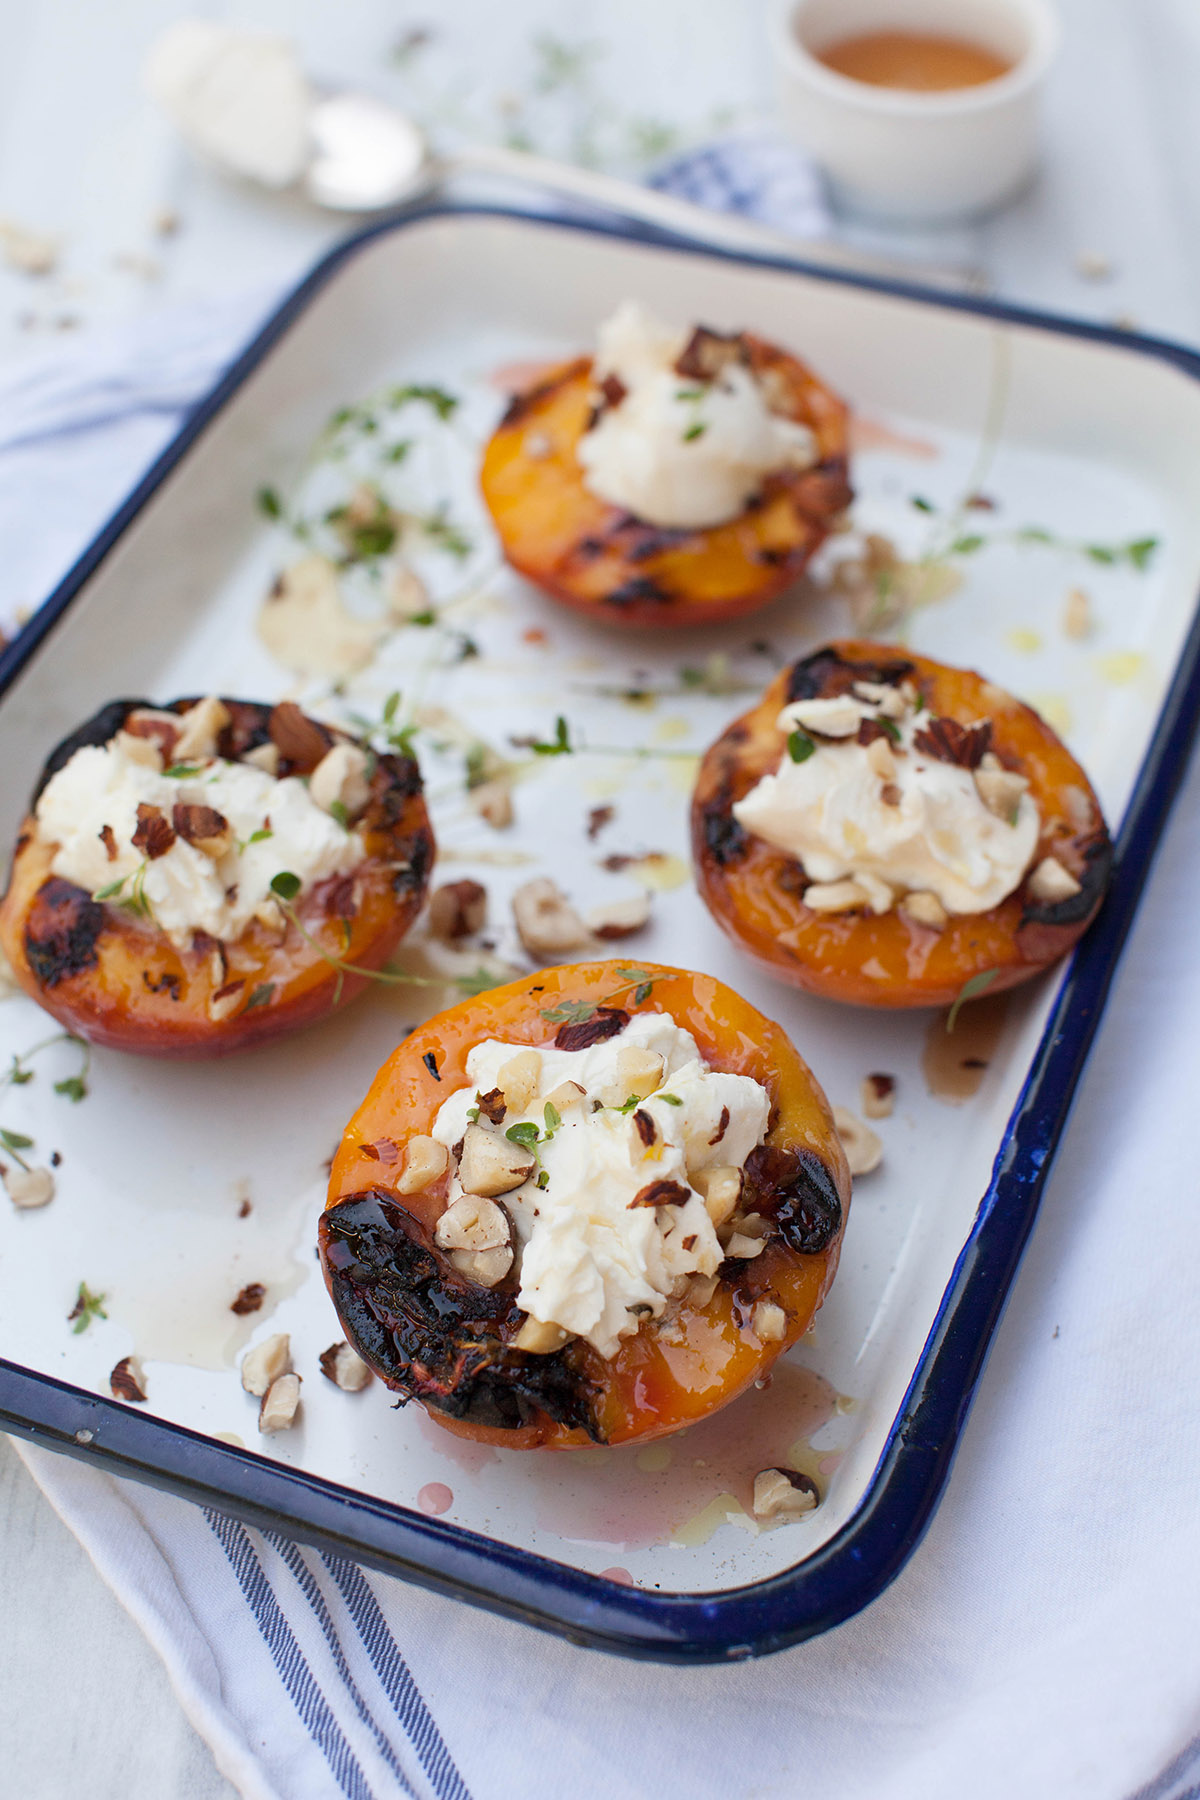 Grilled Peach Halves with Mascarpone Cheese and Honey